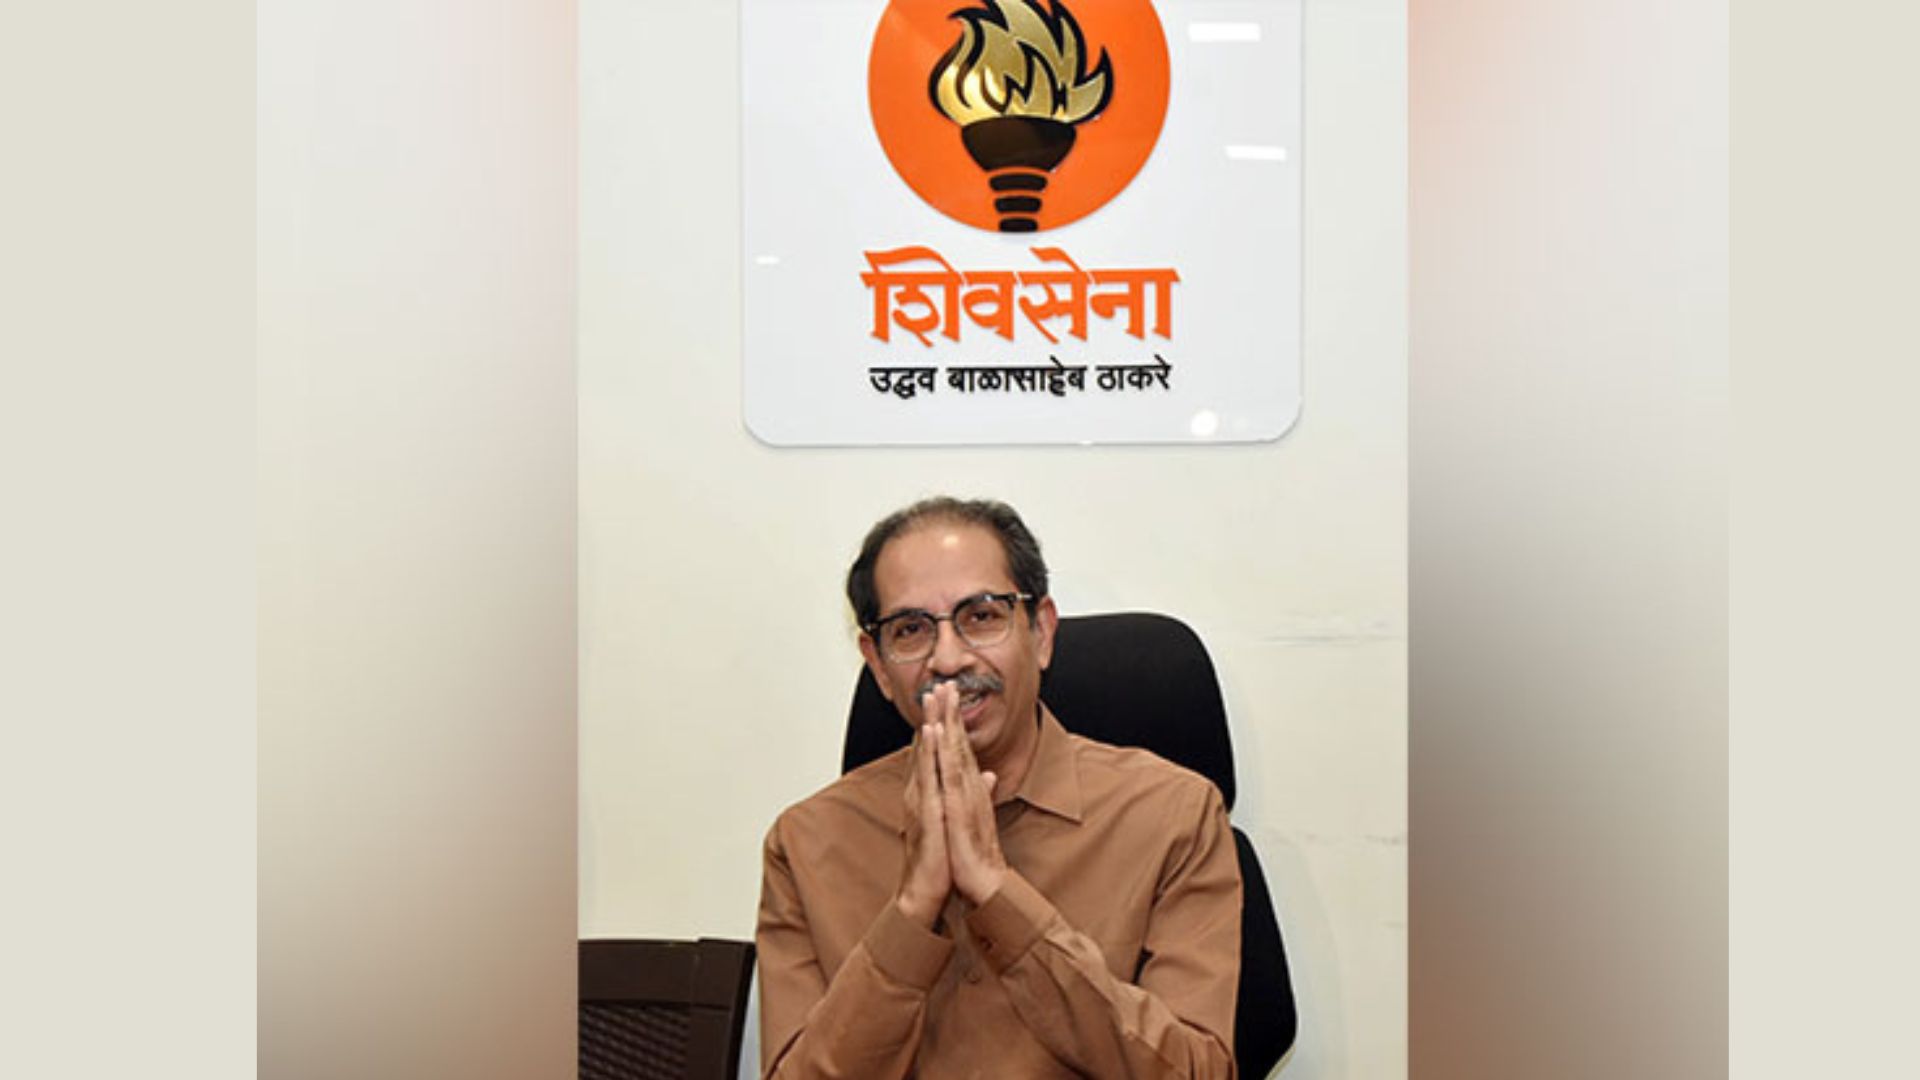 Shiv Sena to Conduct ‘Maha Aarti’ in Nasik on Ram Temple Consecration Day